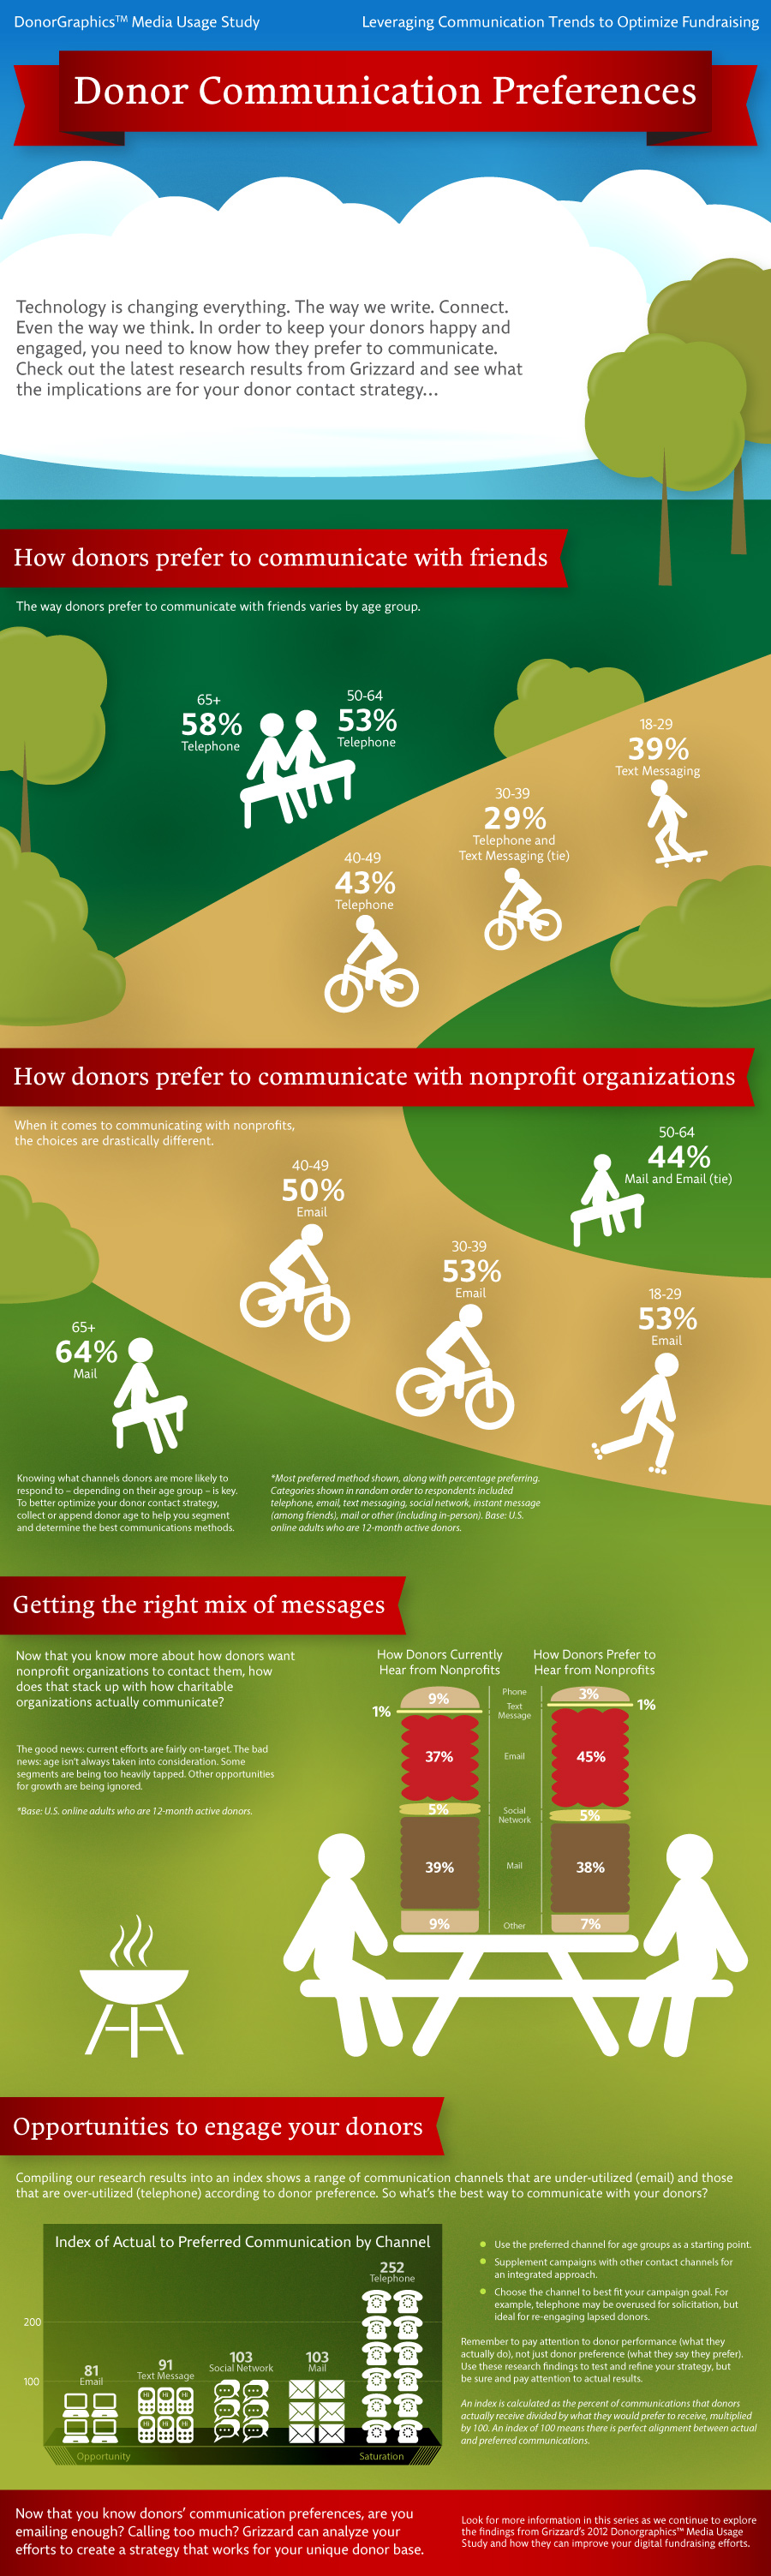 Donor Communication Preferences Infographic